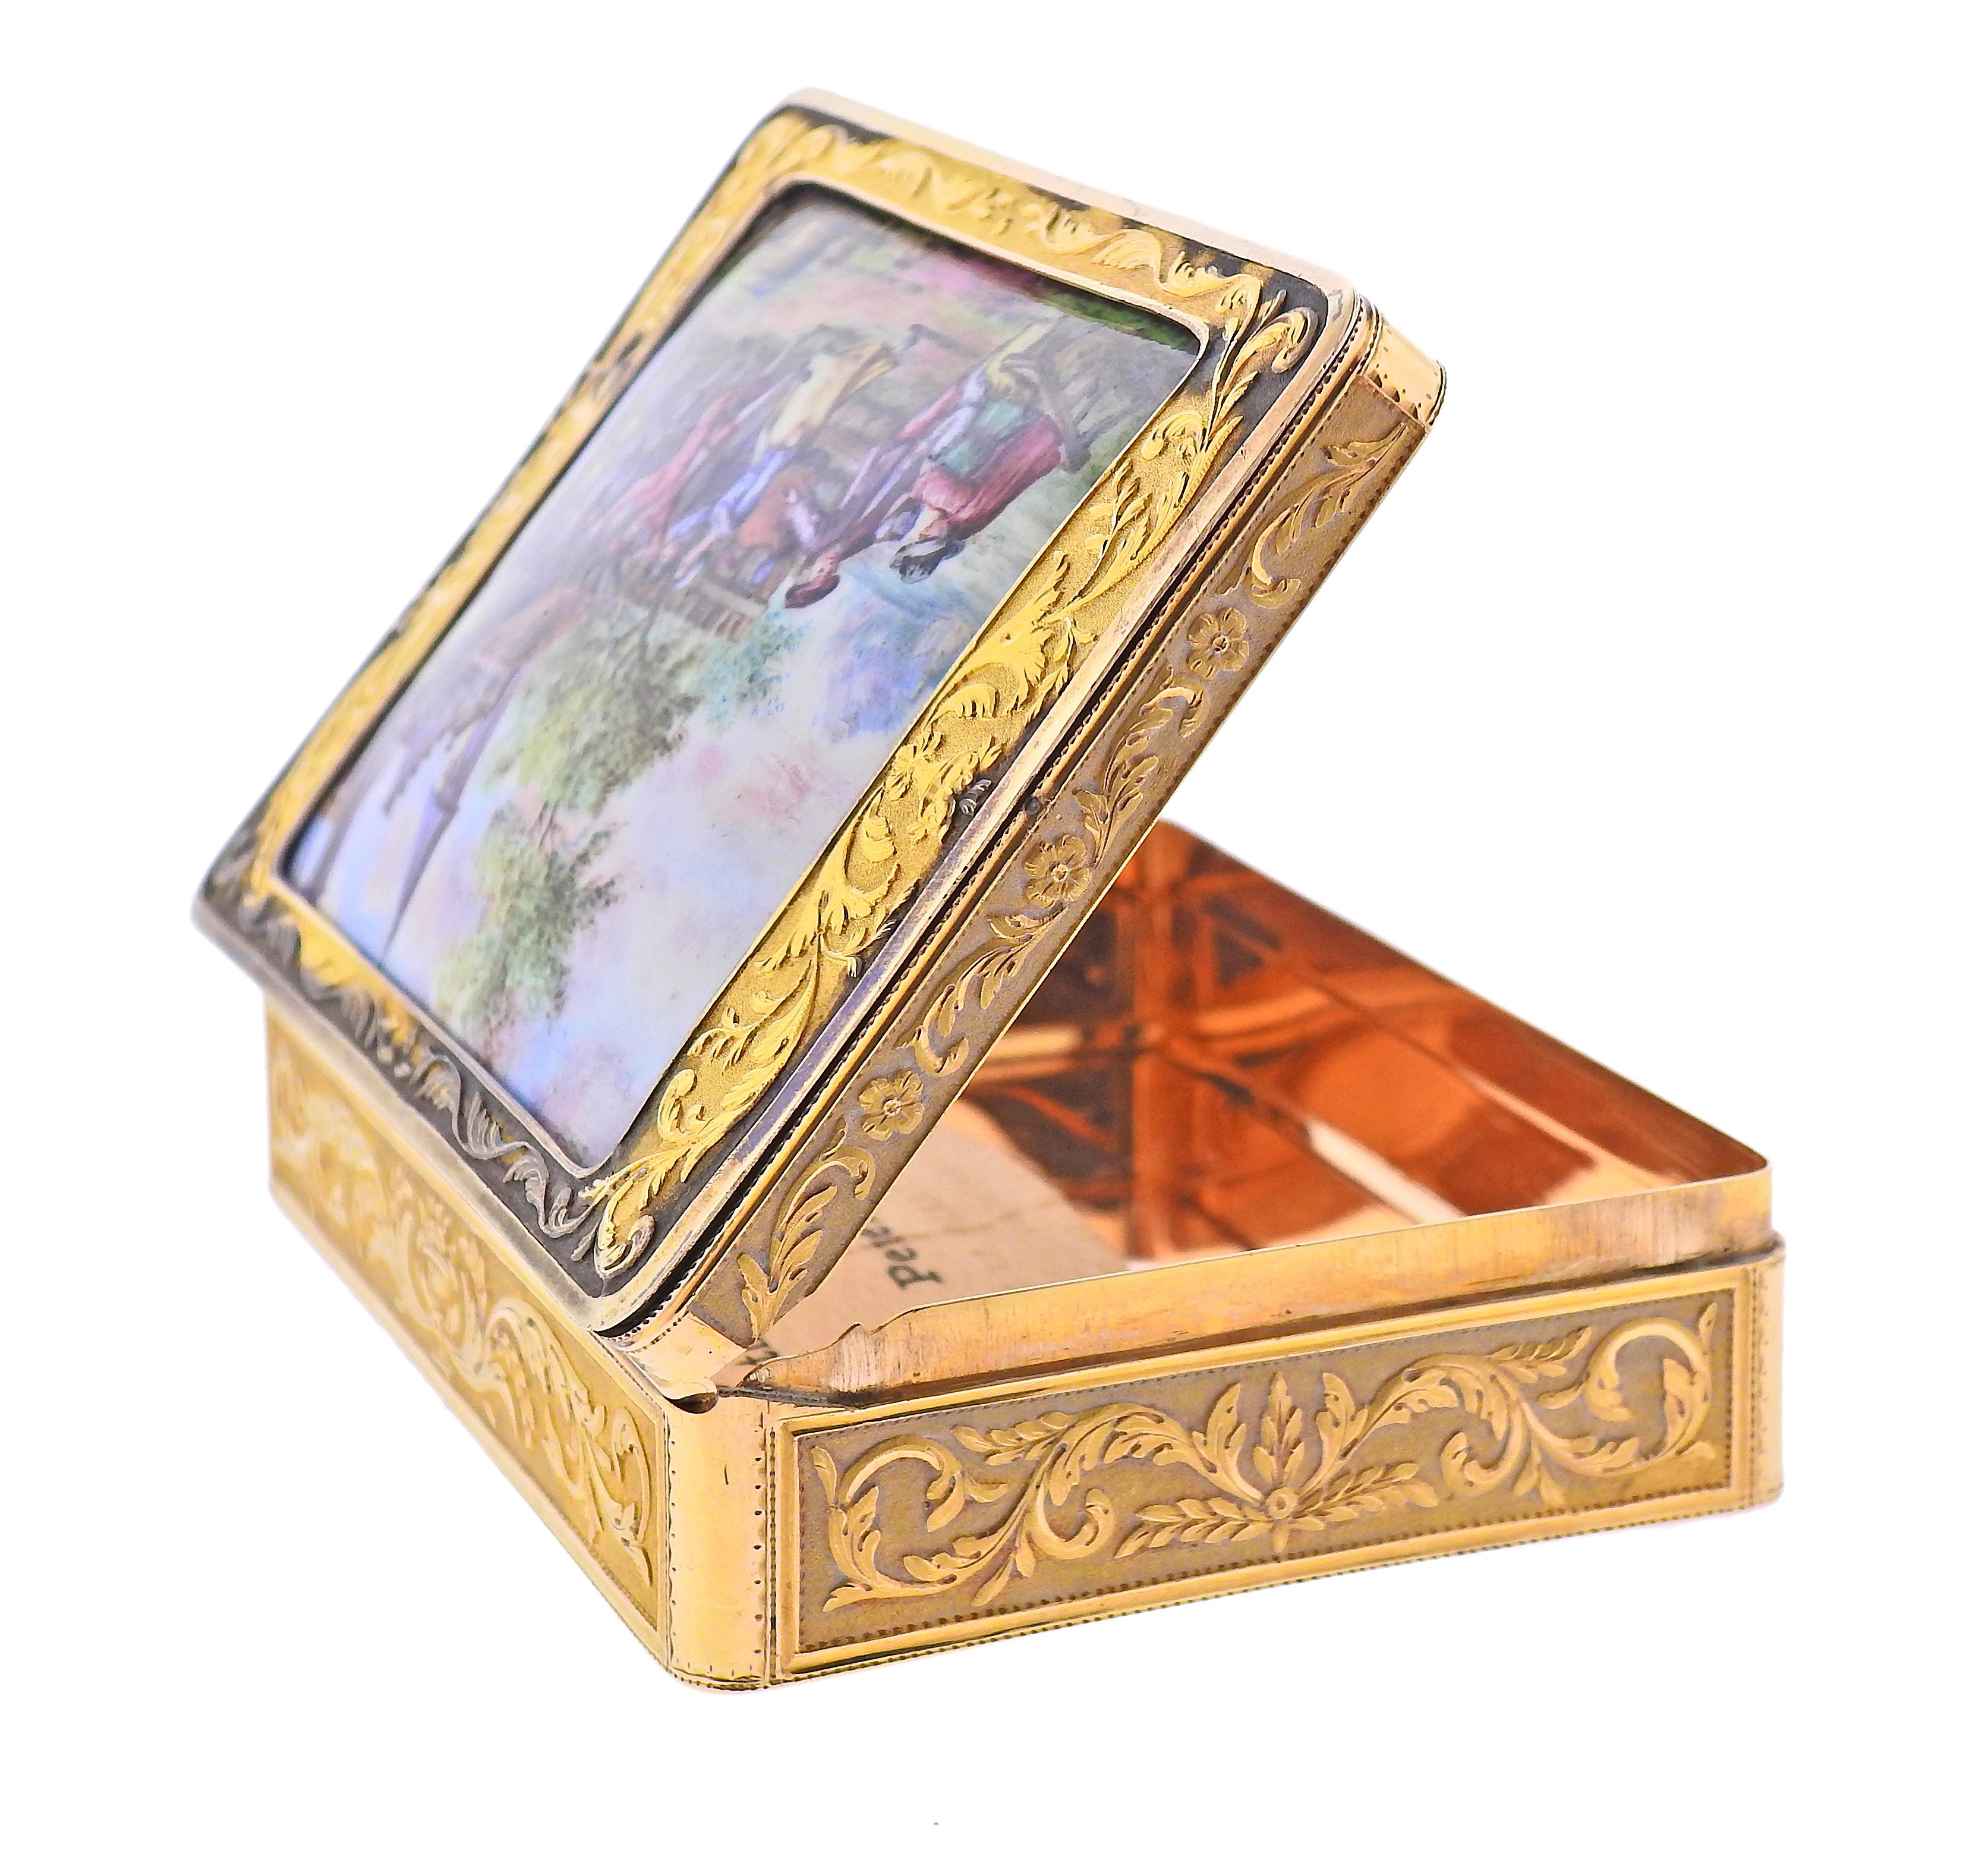 Antique Circa 1810s, Russian made box, in 14k gold with hand applied enamel. Box measures 3.5